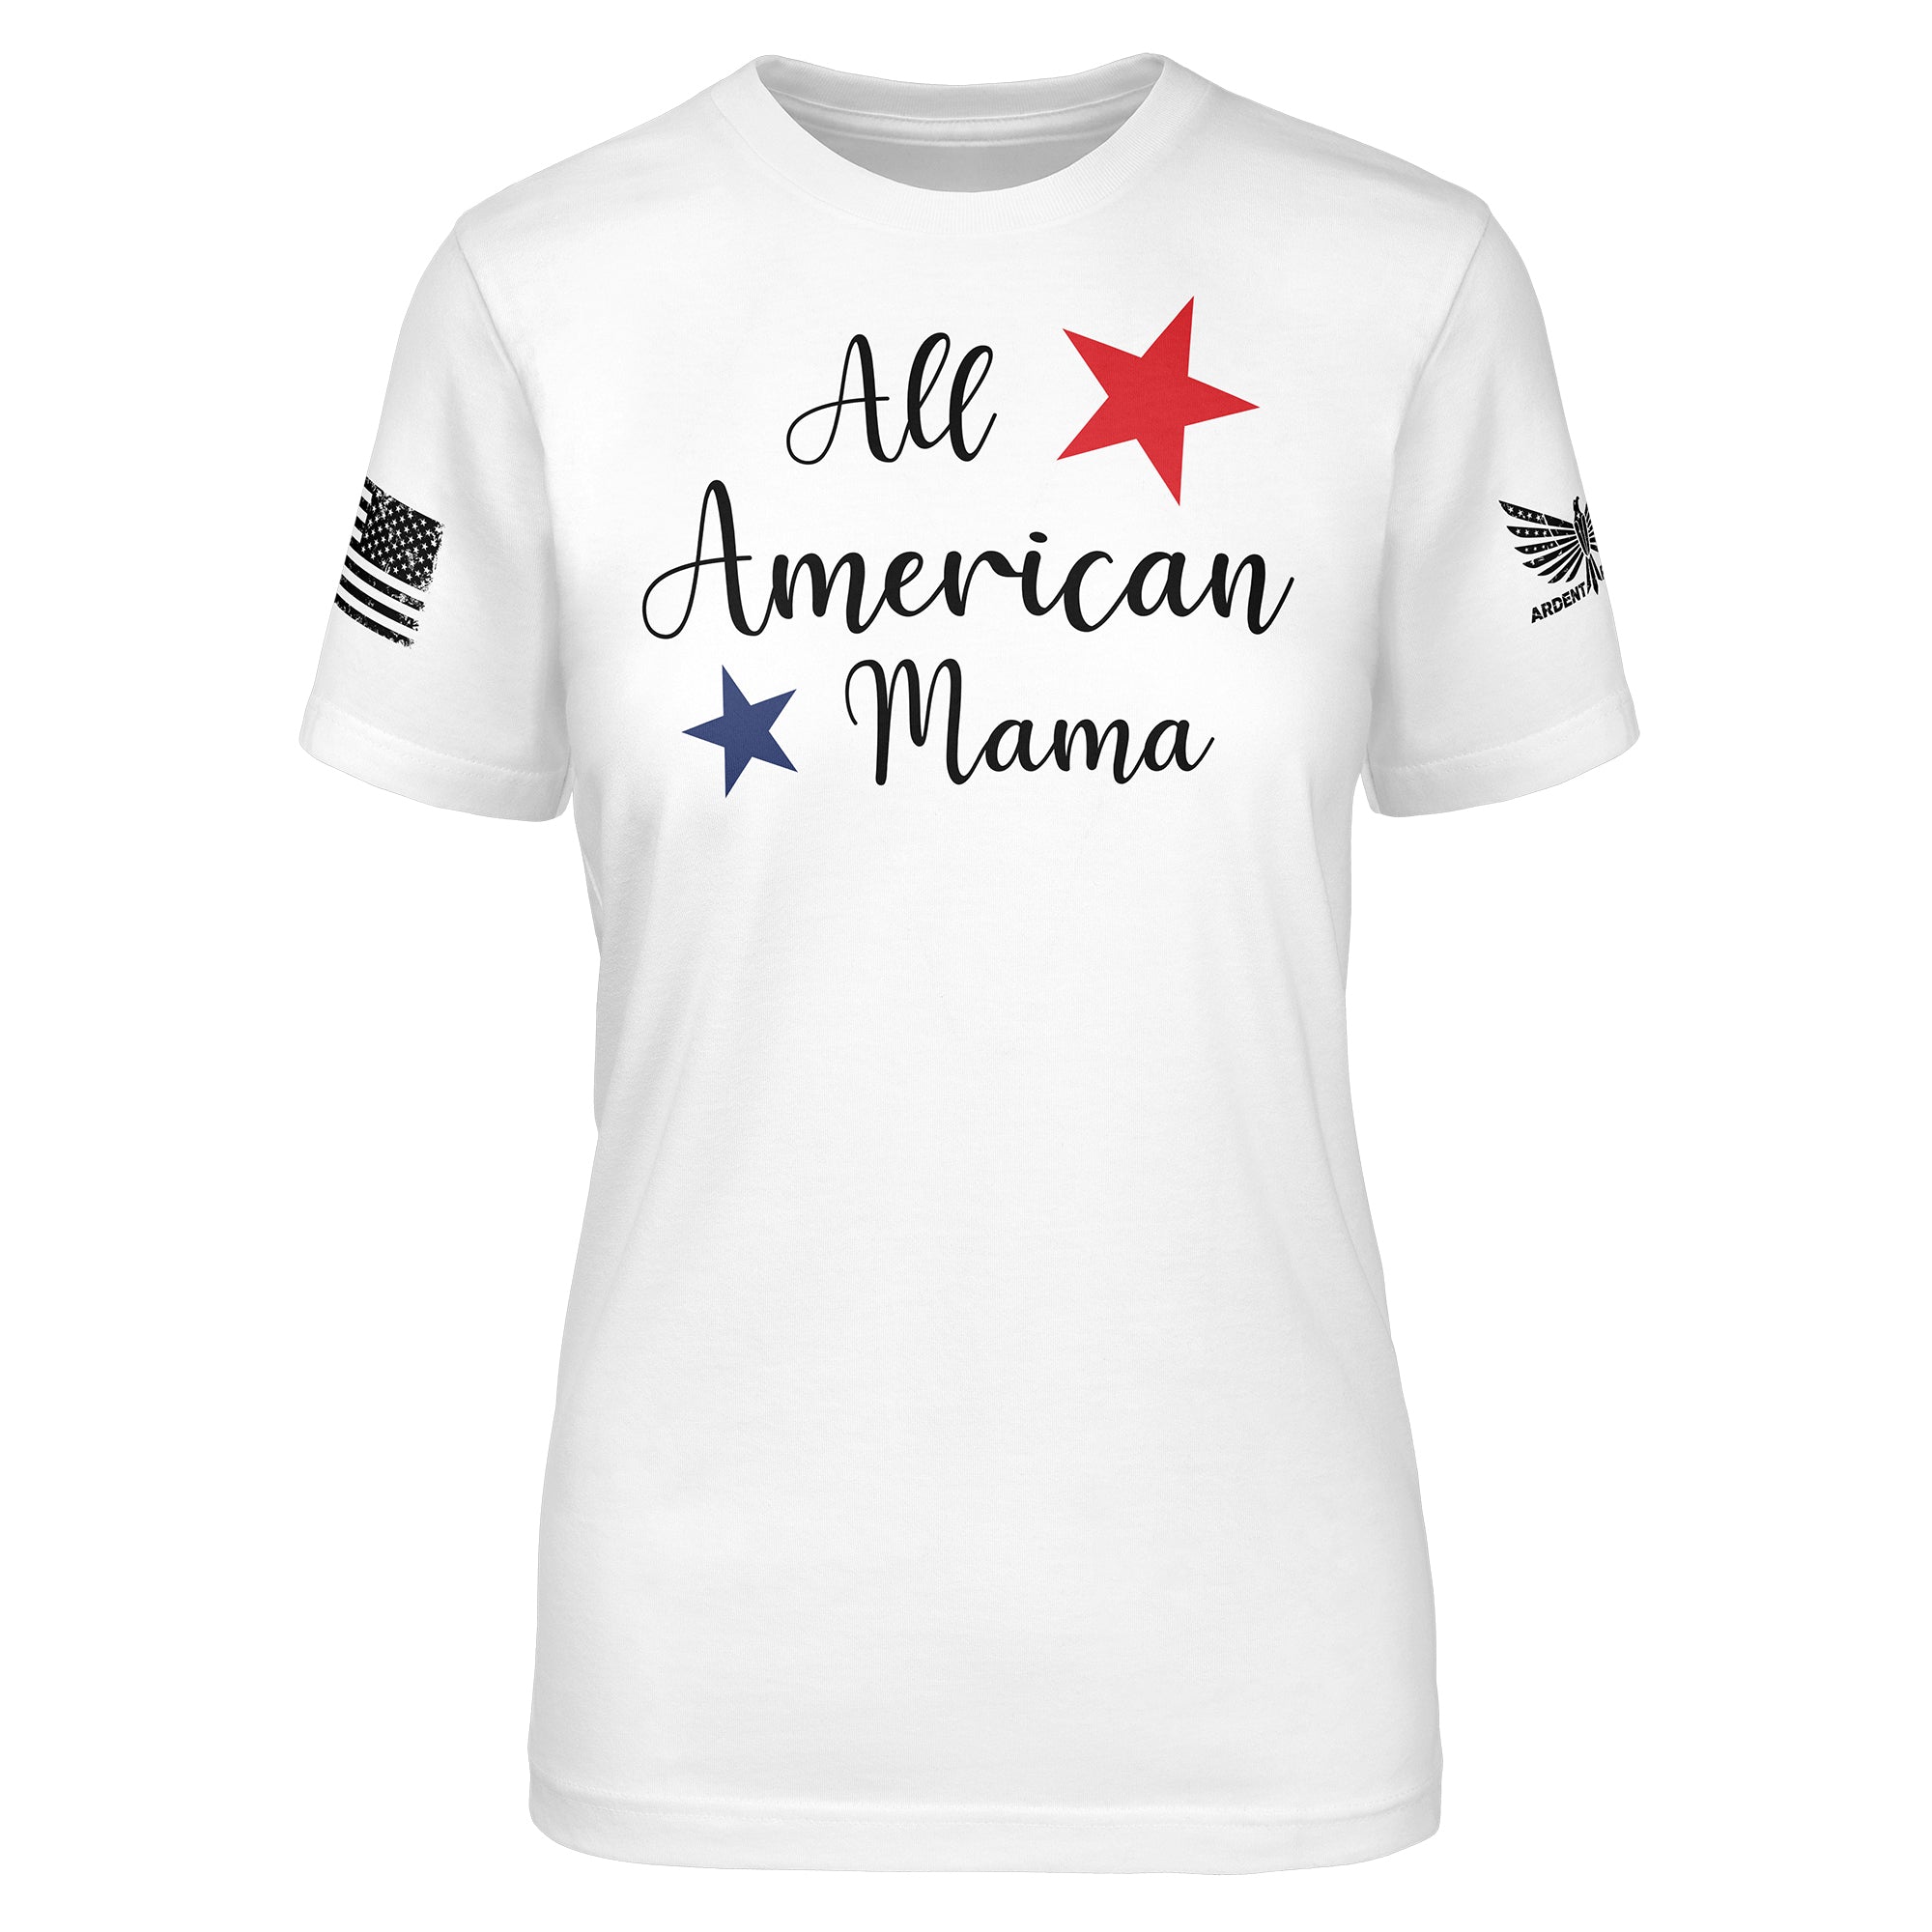 All American Mama-Women's Shirt-S-Ardent Patriot Apparel Co.